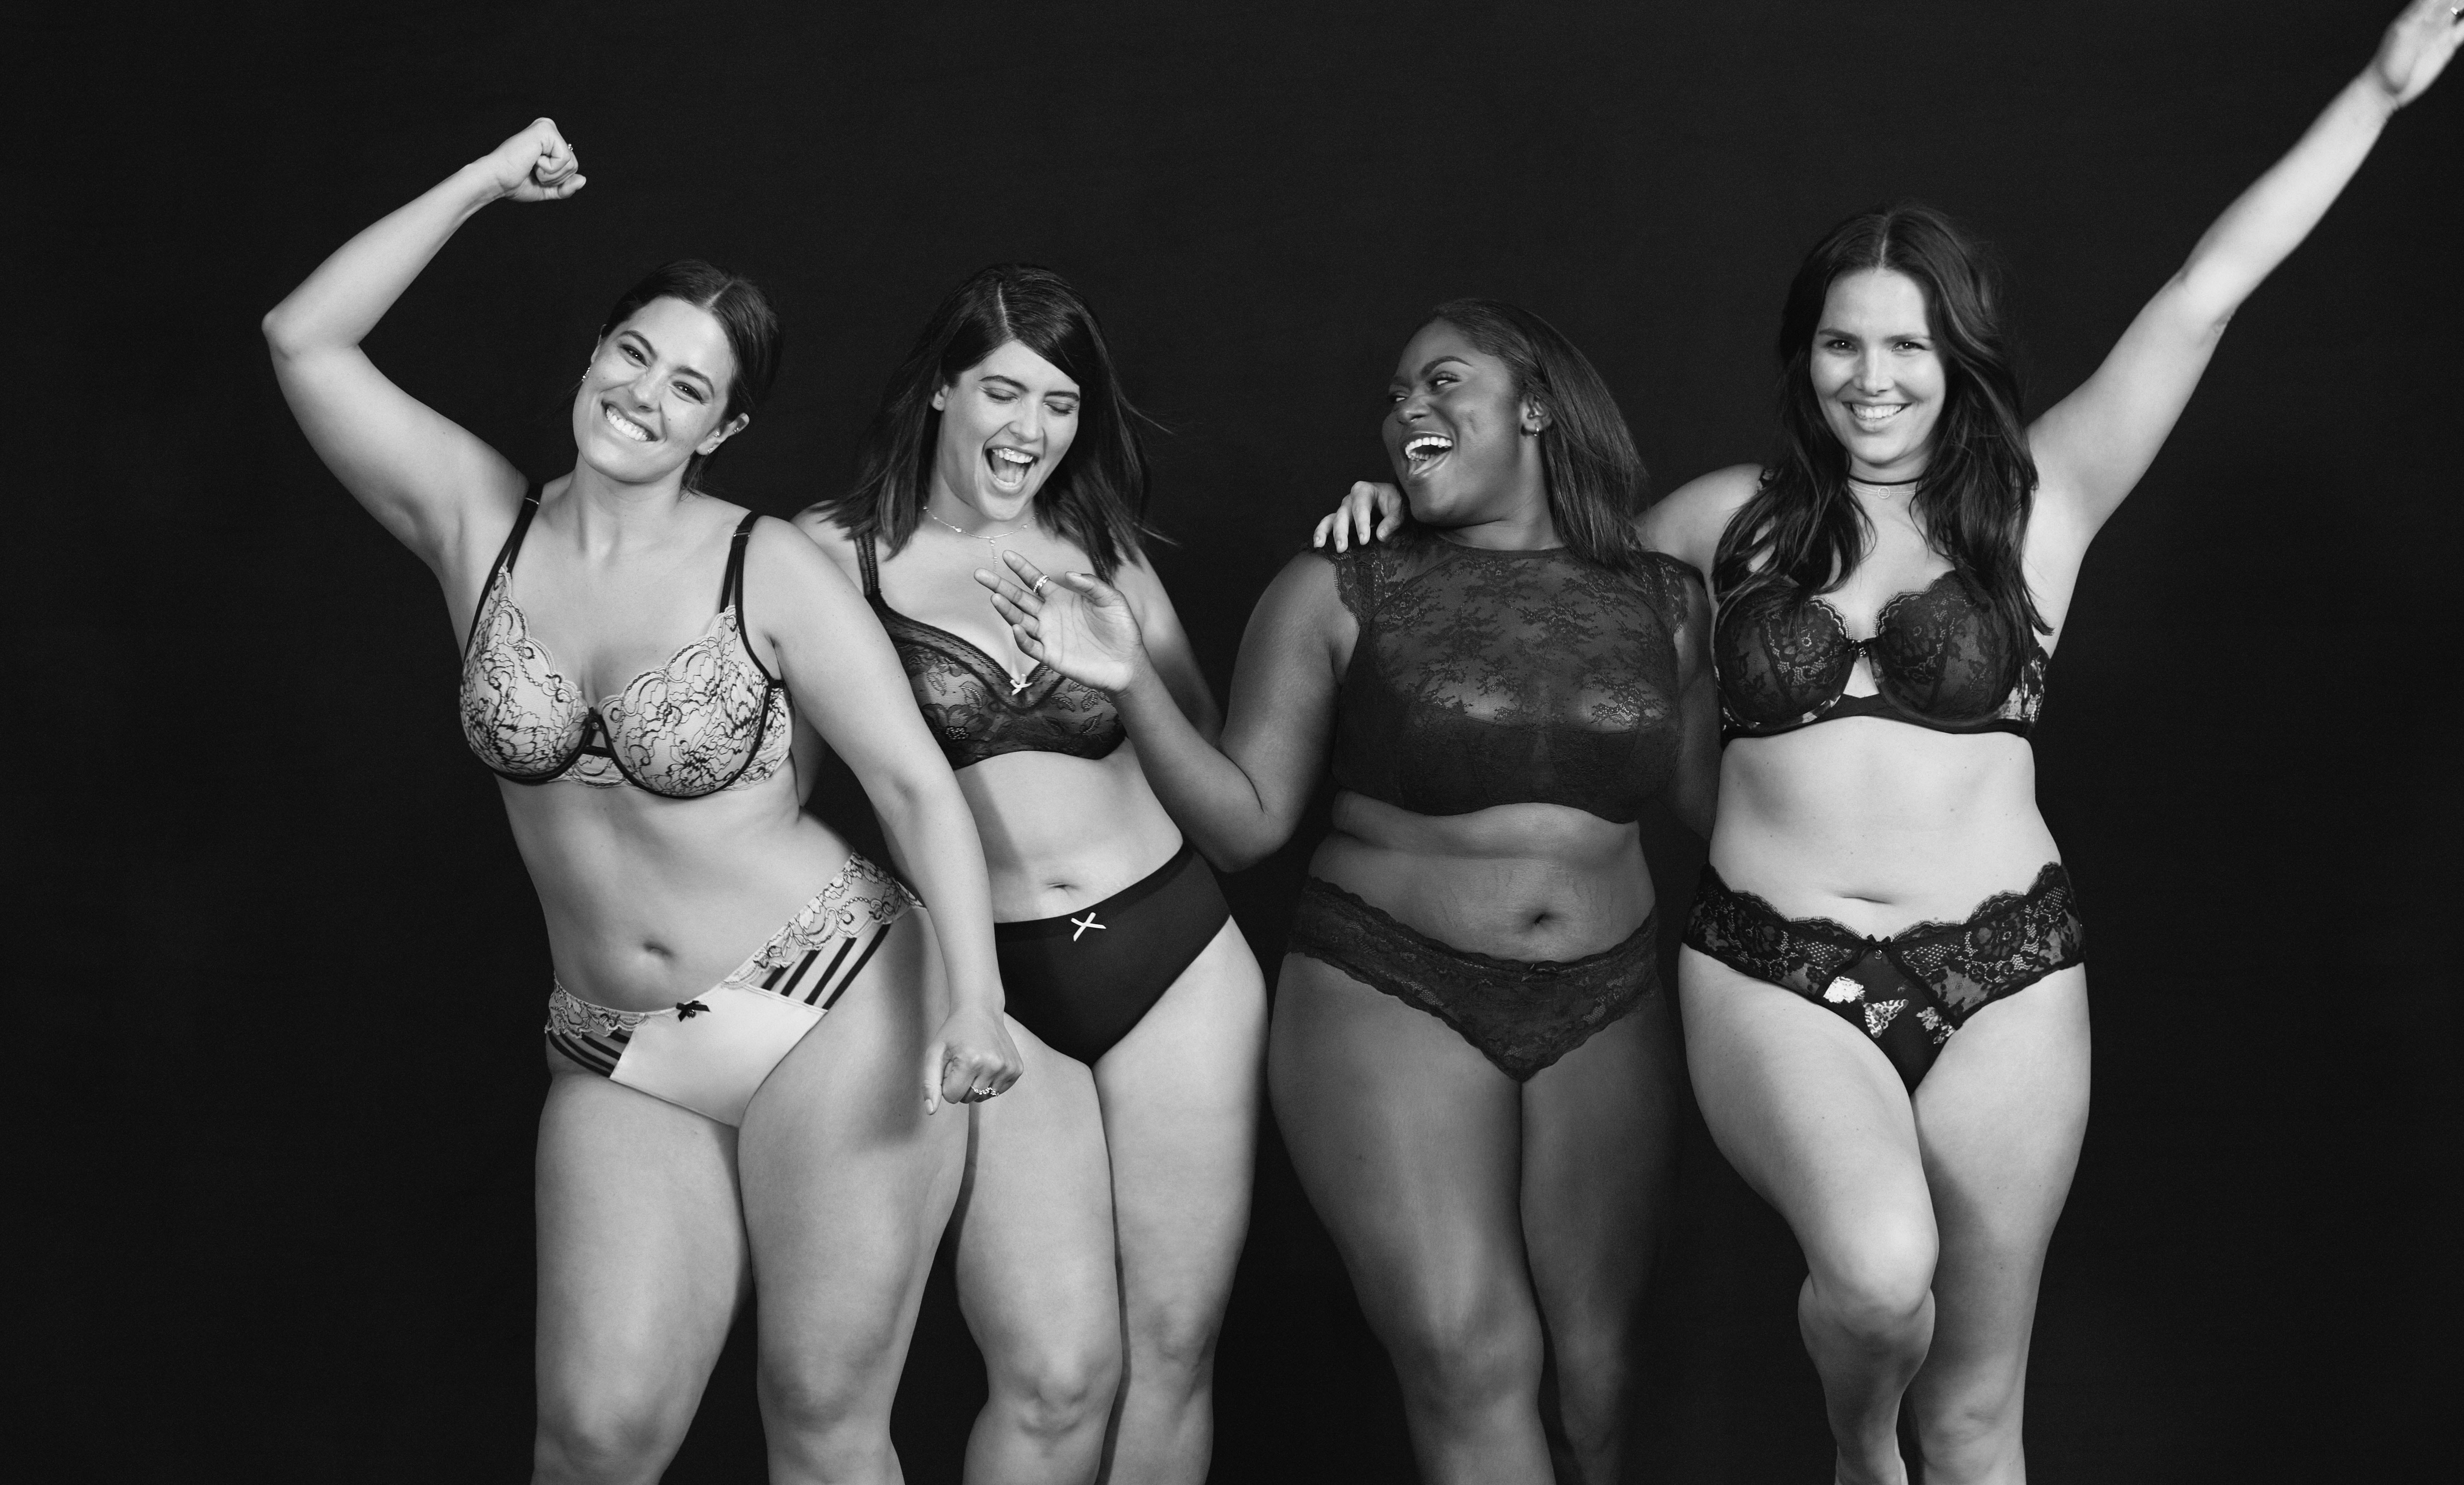 Lane Bryant - The Seriously Sexy Collection. Because, reallywho needs  mistletoe? 😏 Check out Cacique for even more sexy (if you can handle it).  Shop